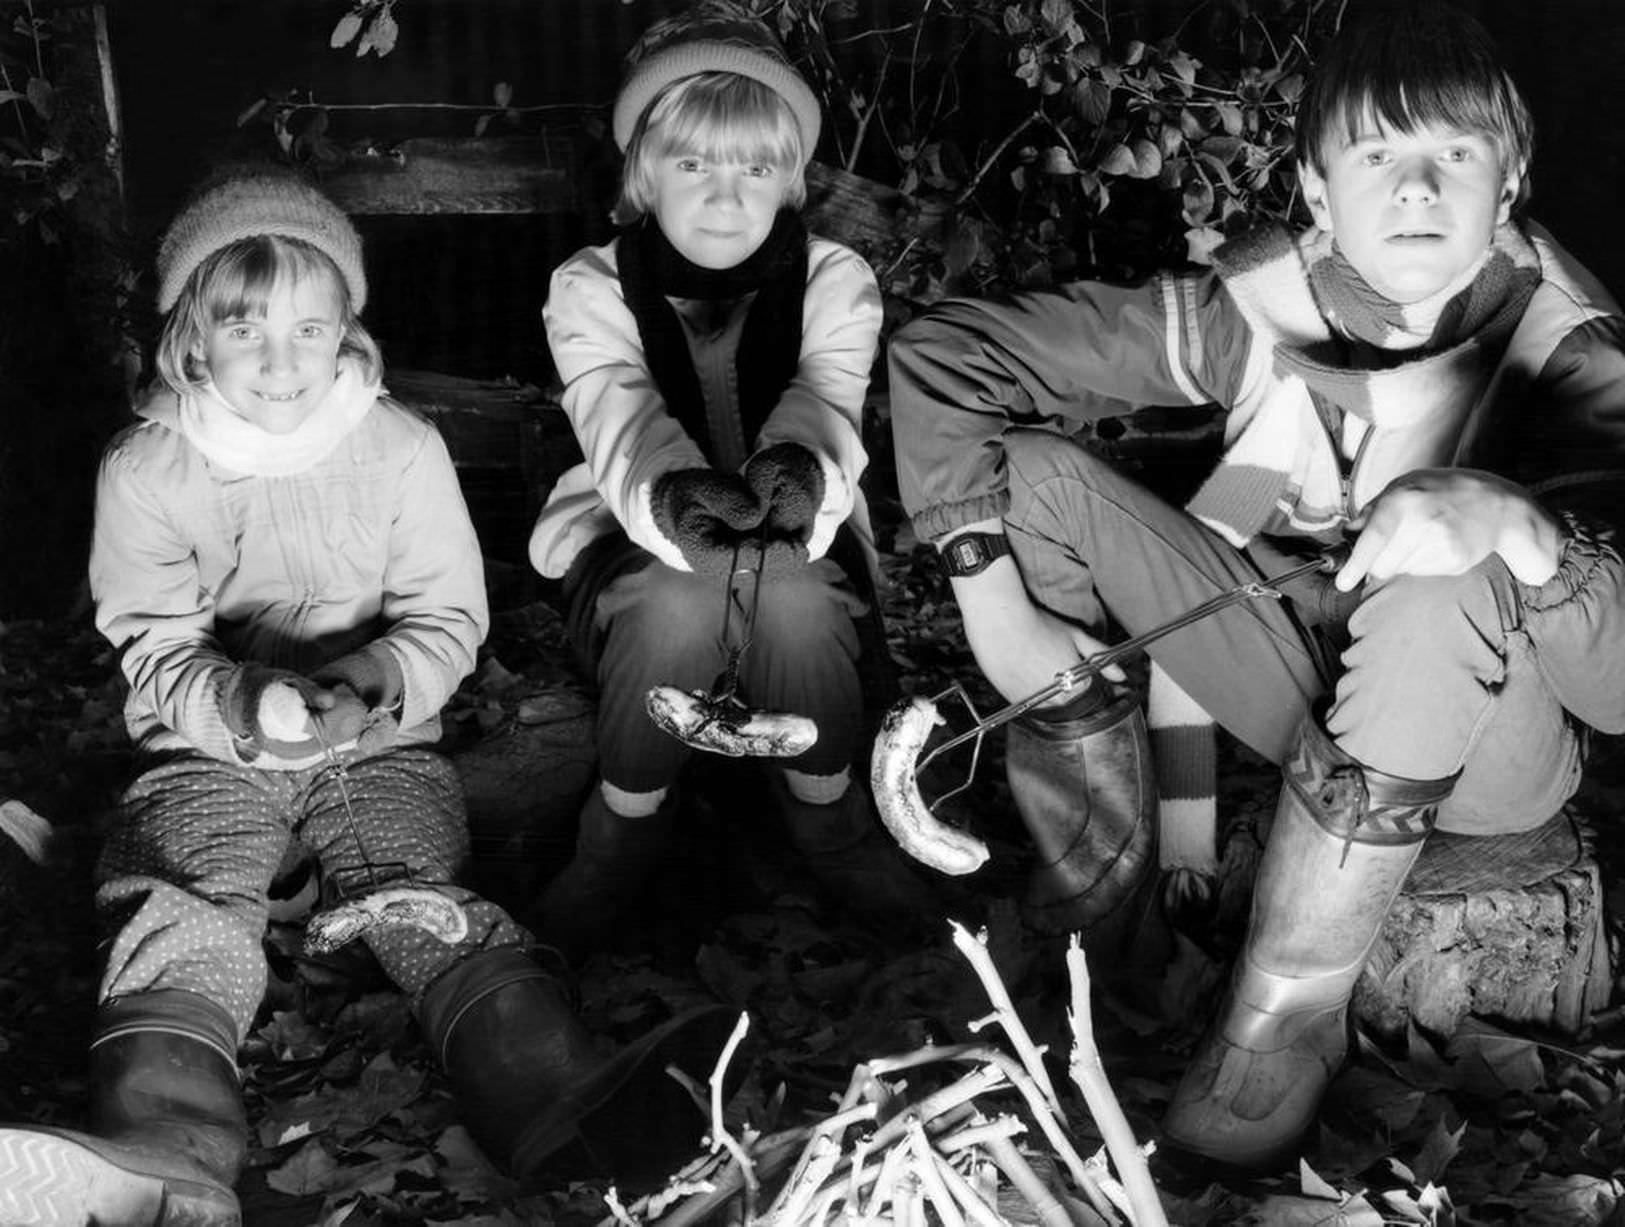 The original bonfire night banger. Children at a private Merseyside bonfire night part cooking sausages over the fire, 5th November 1985